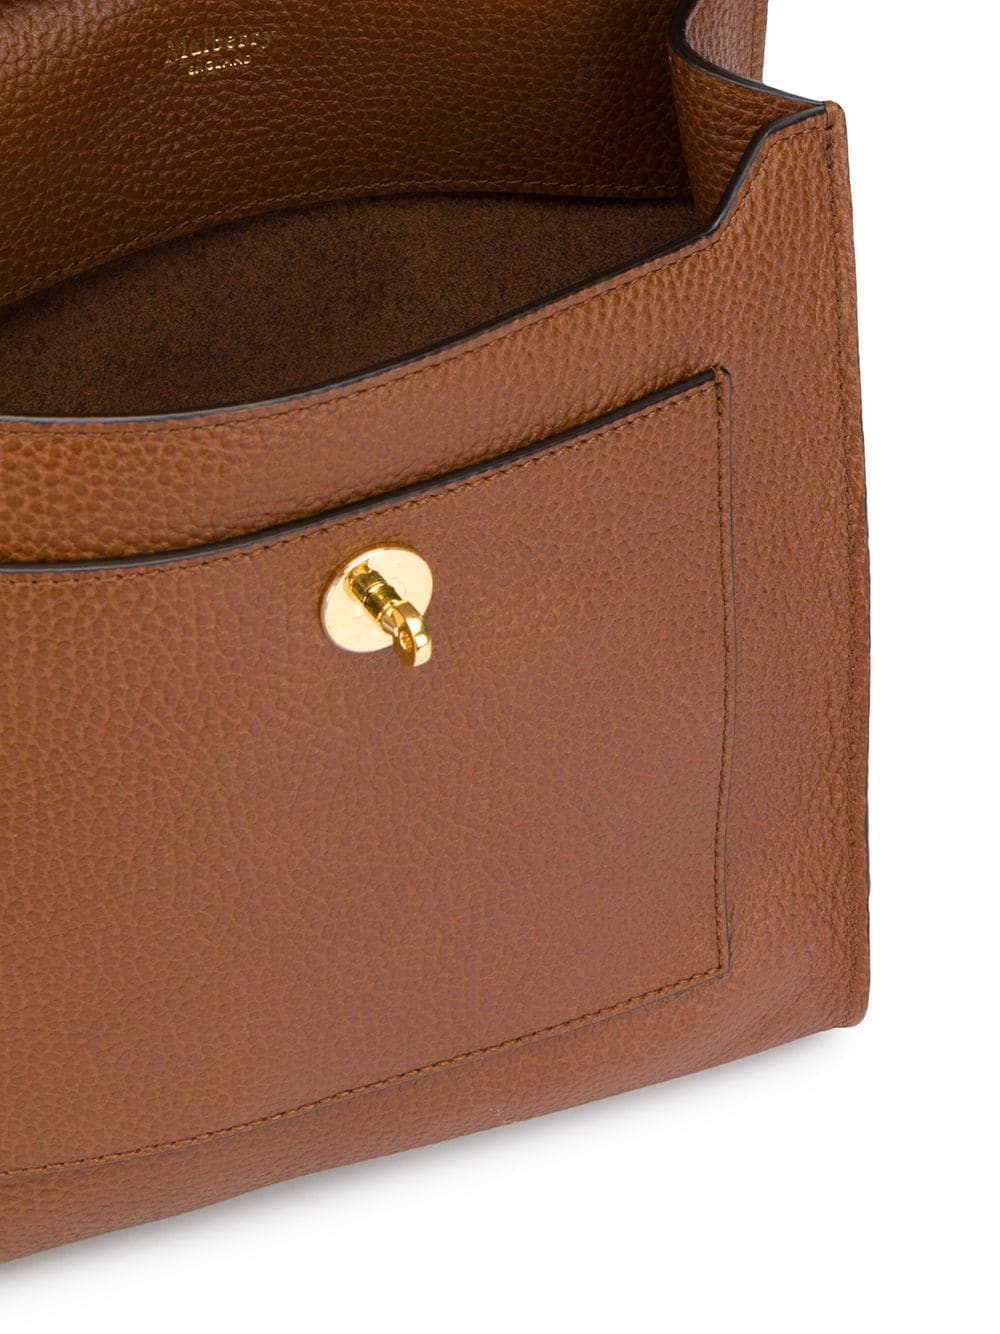 Shop Mulberry Antony messenger bag with Express Delivery - FARFETCH